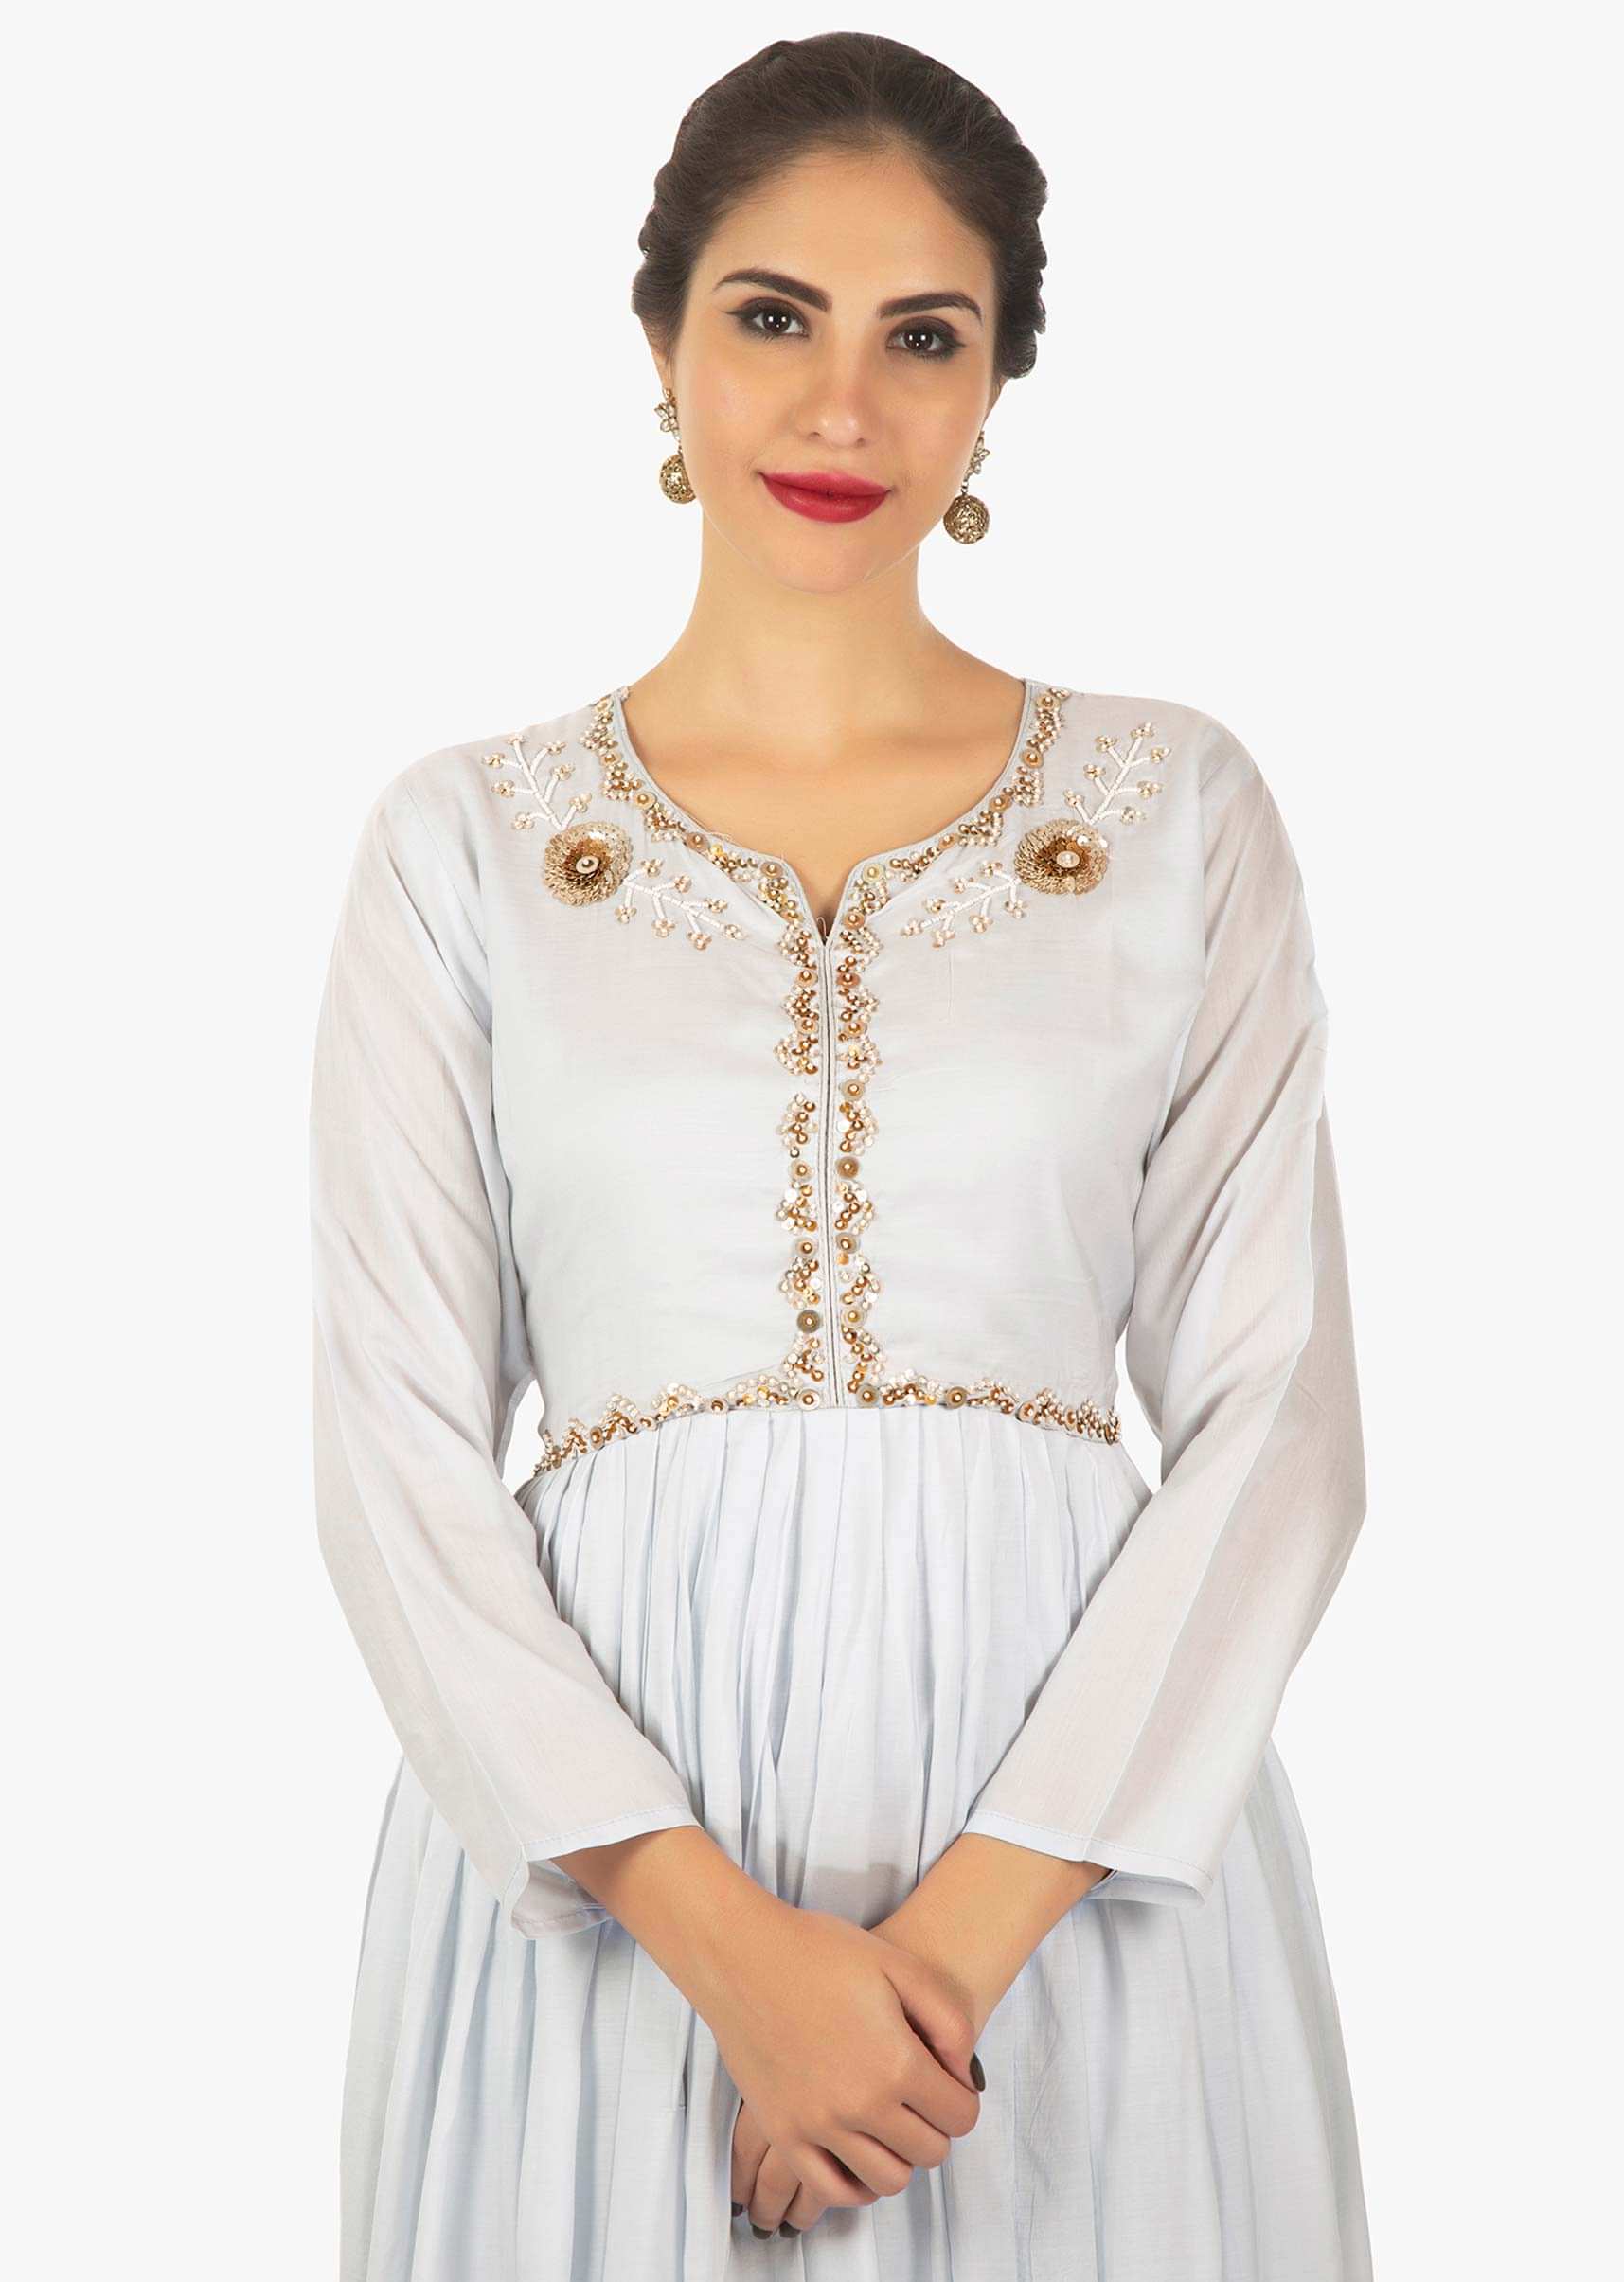 Flint blue cotton kurti with gathers paired with over lapping dhoti pant